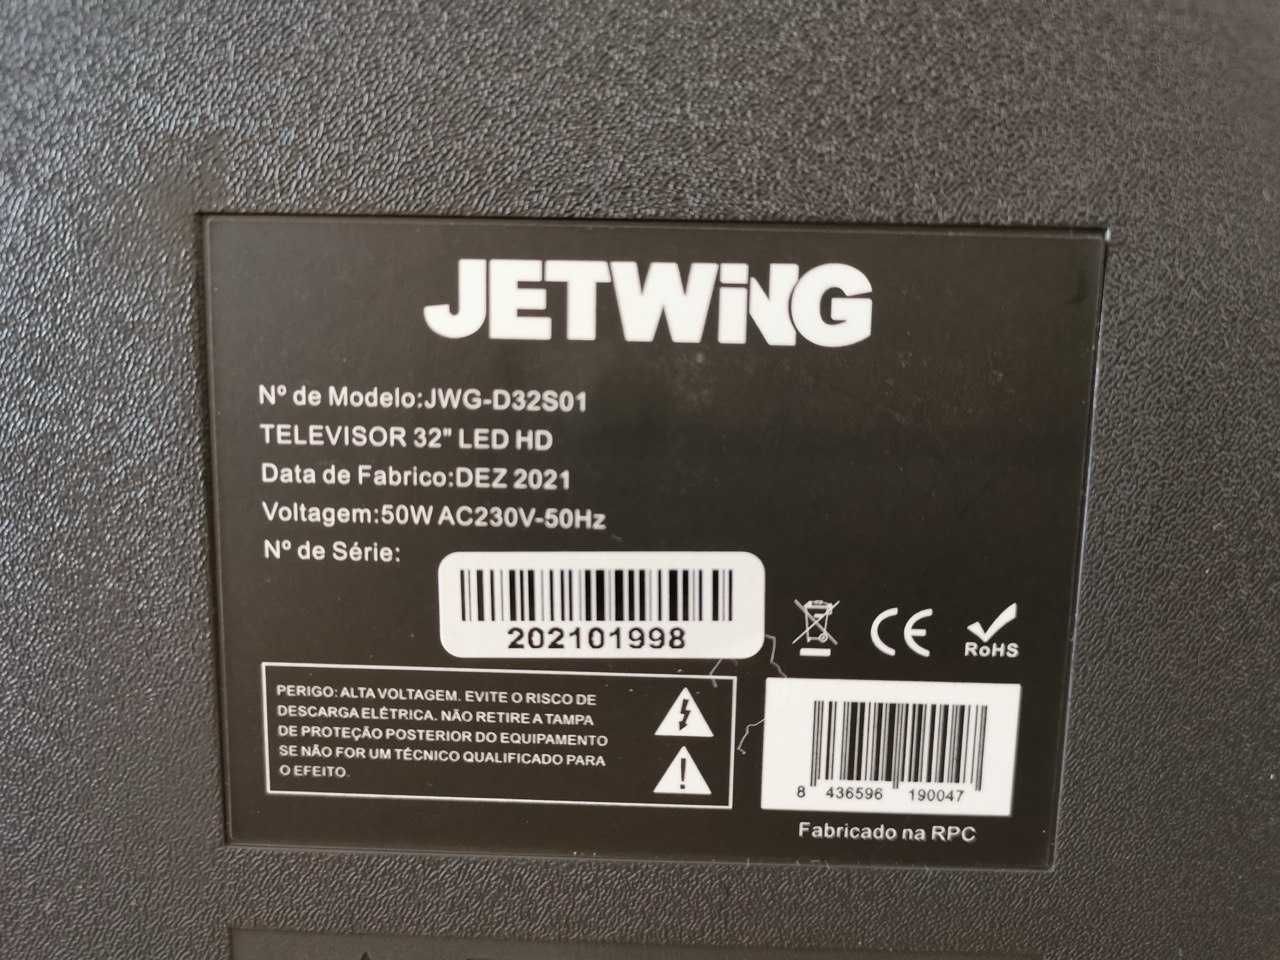 TV LED HD Jetwing 32"